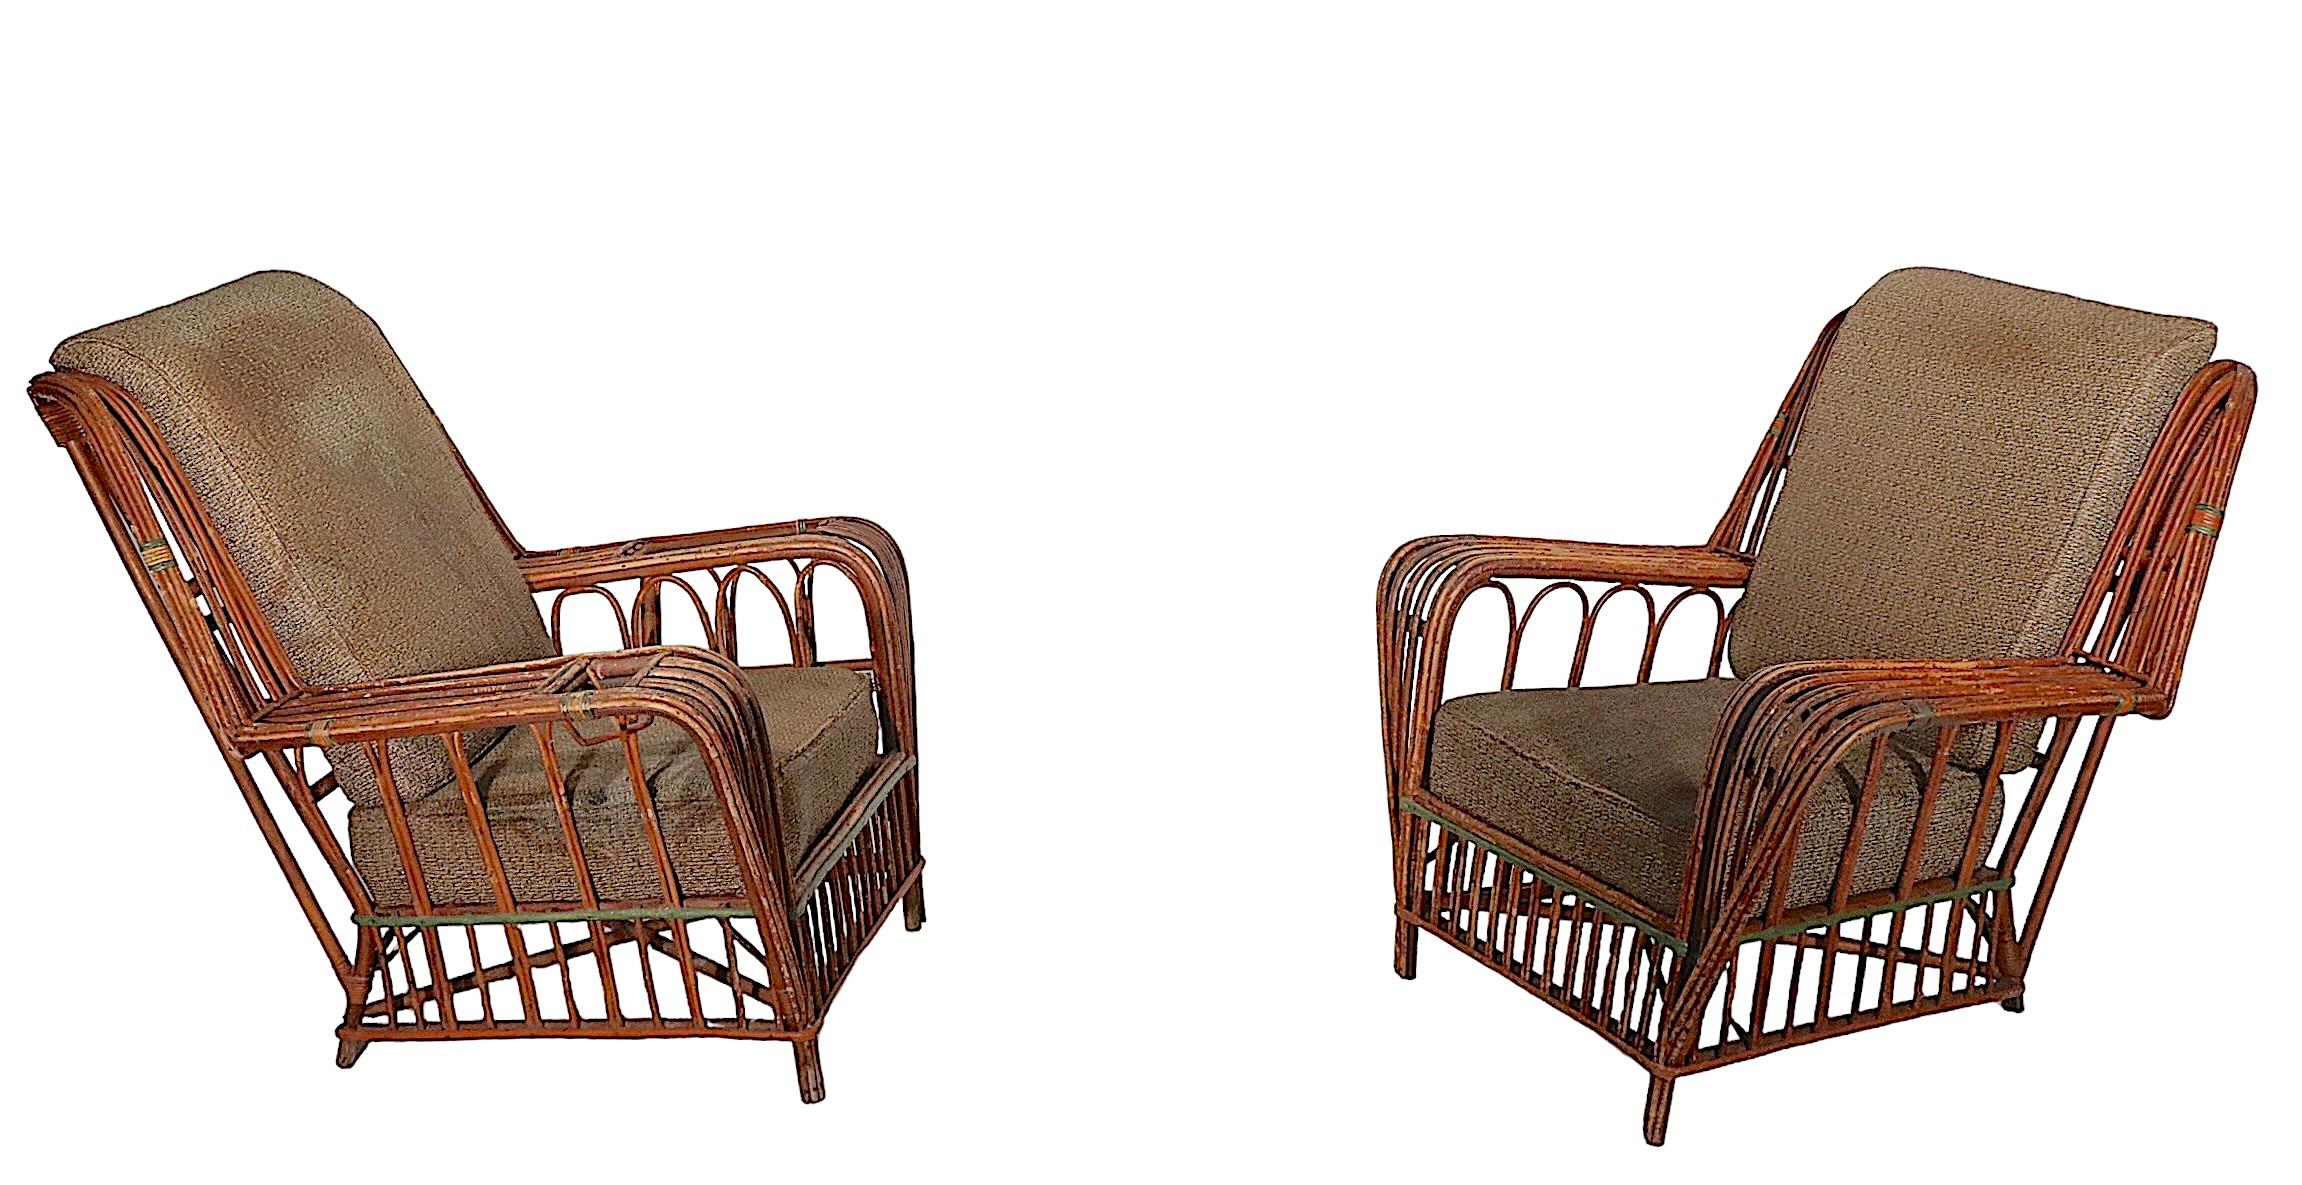 Willow 3 Pc Set Art Deco Split Reed Chairs and Ottoman, circa 1920-1930s